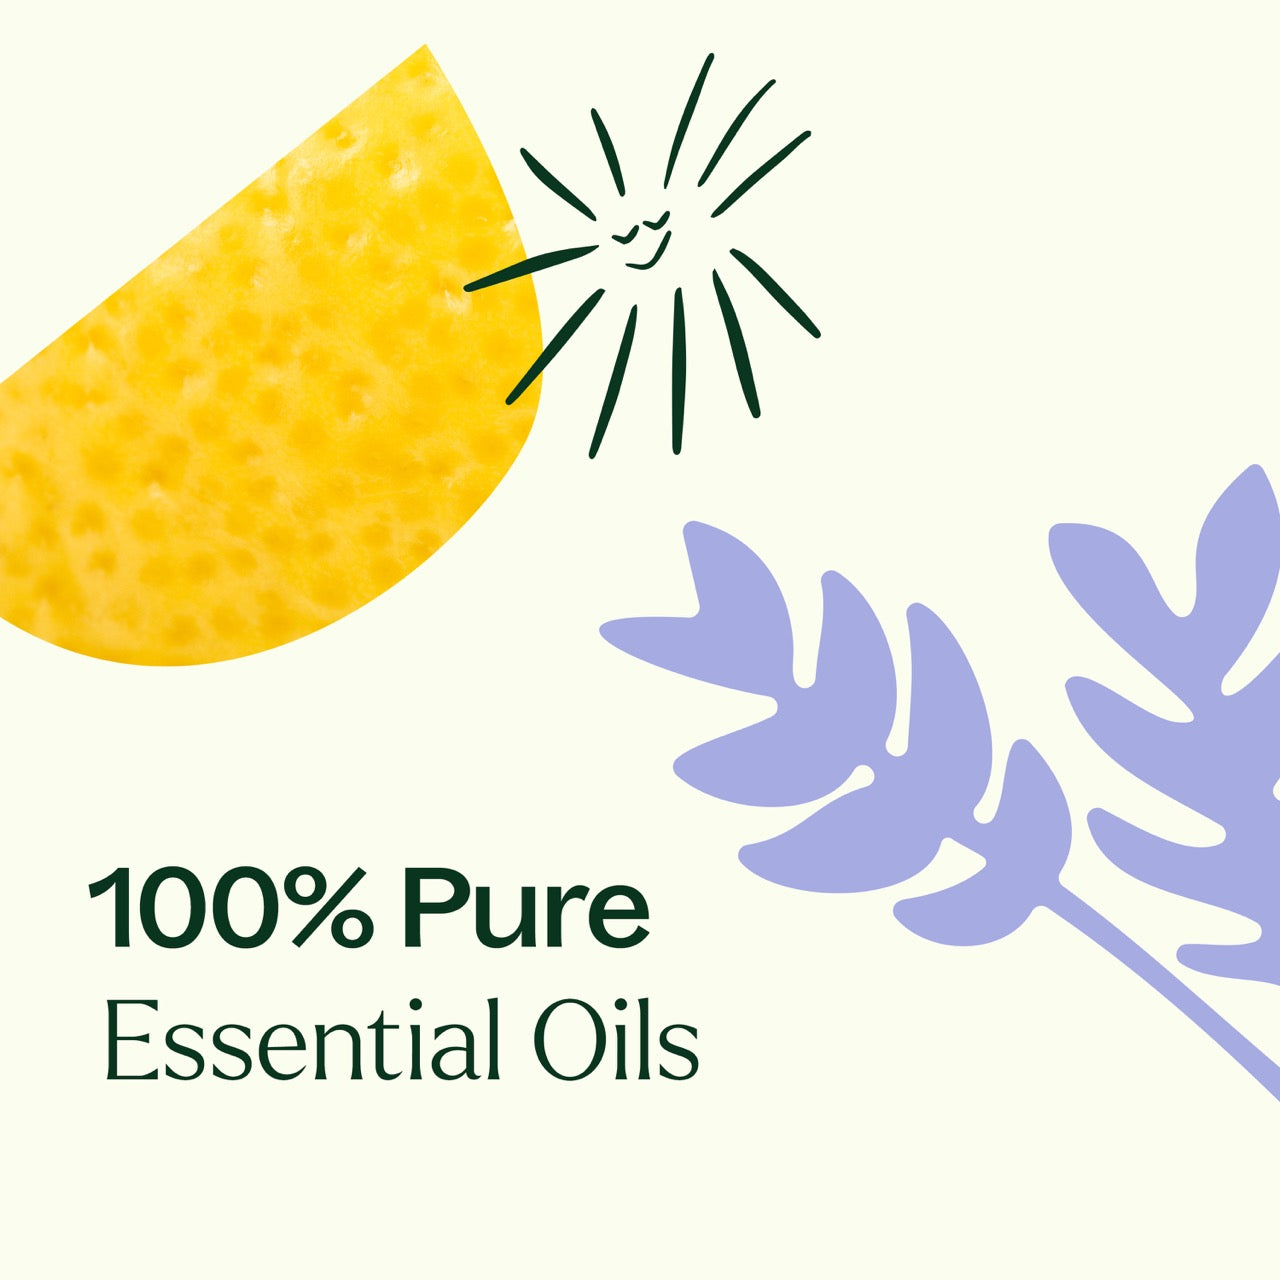 Top 6 Organic Singles Essential Oil Set is made of 100% pure essential oils